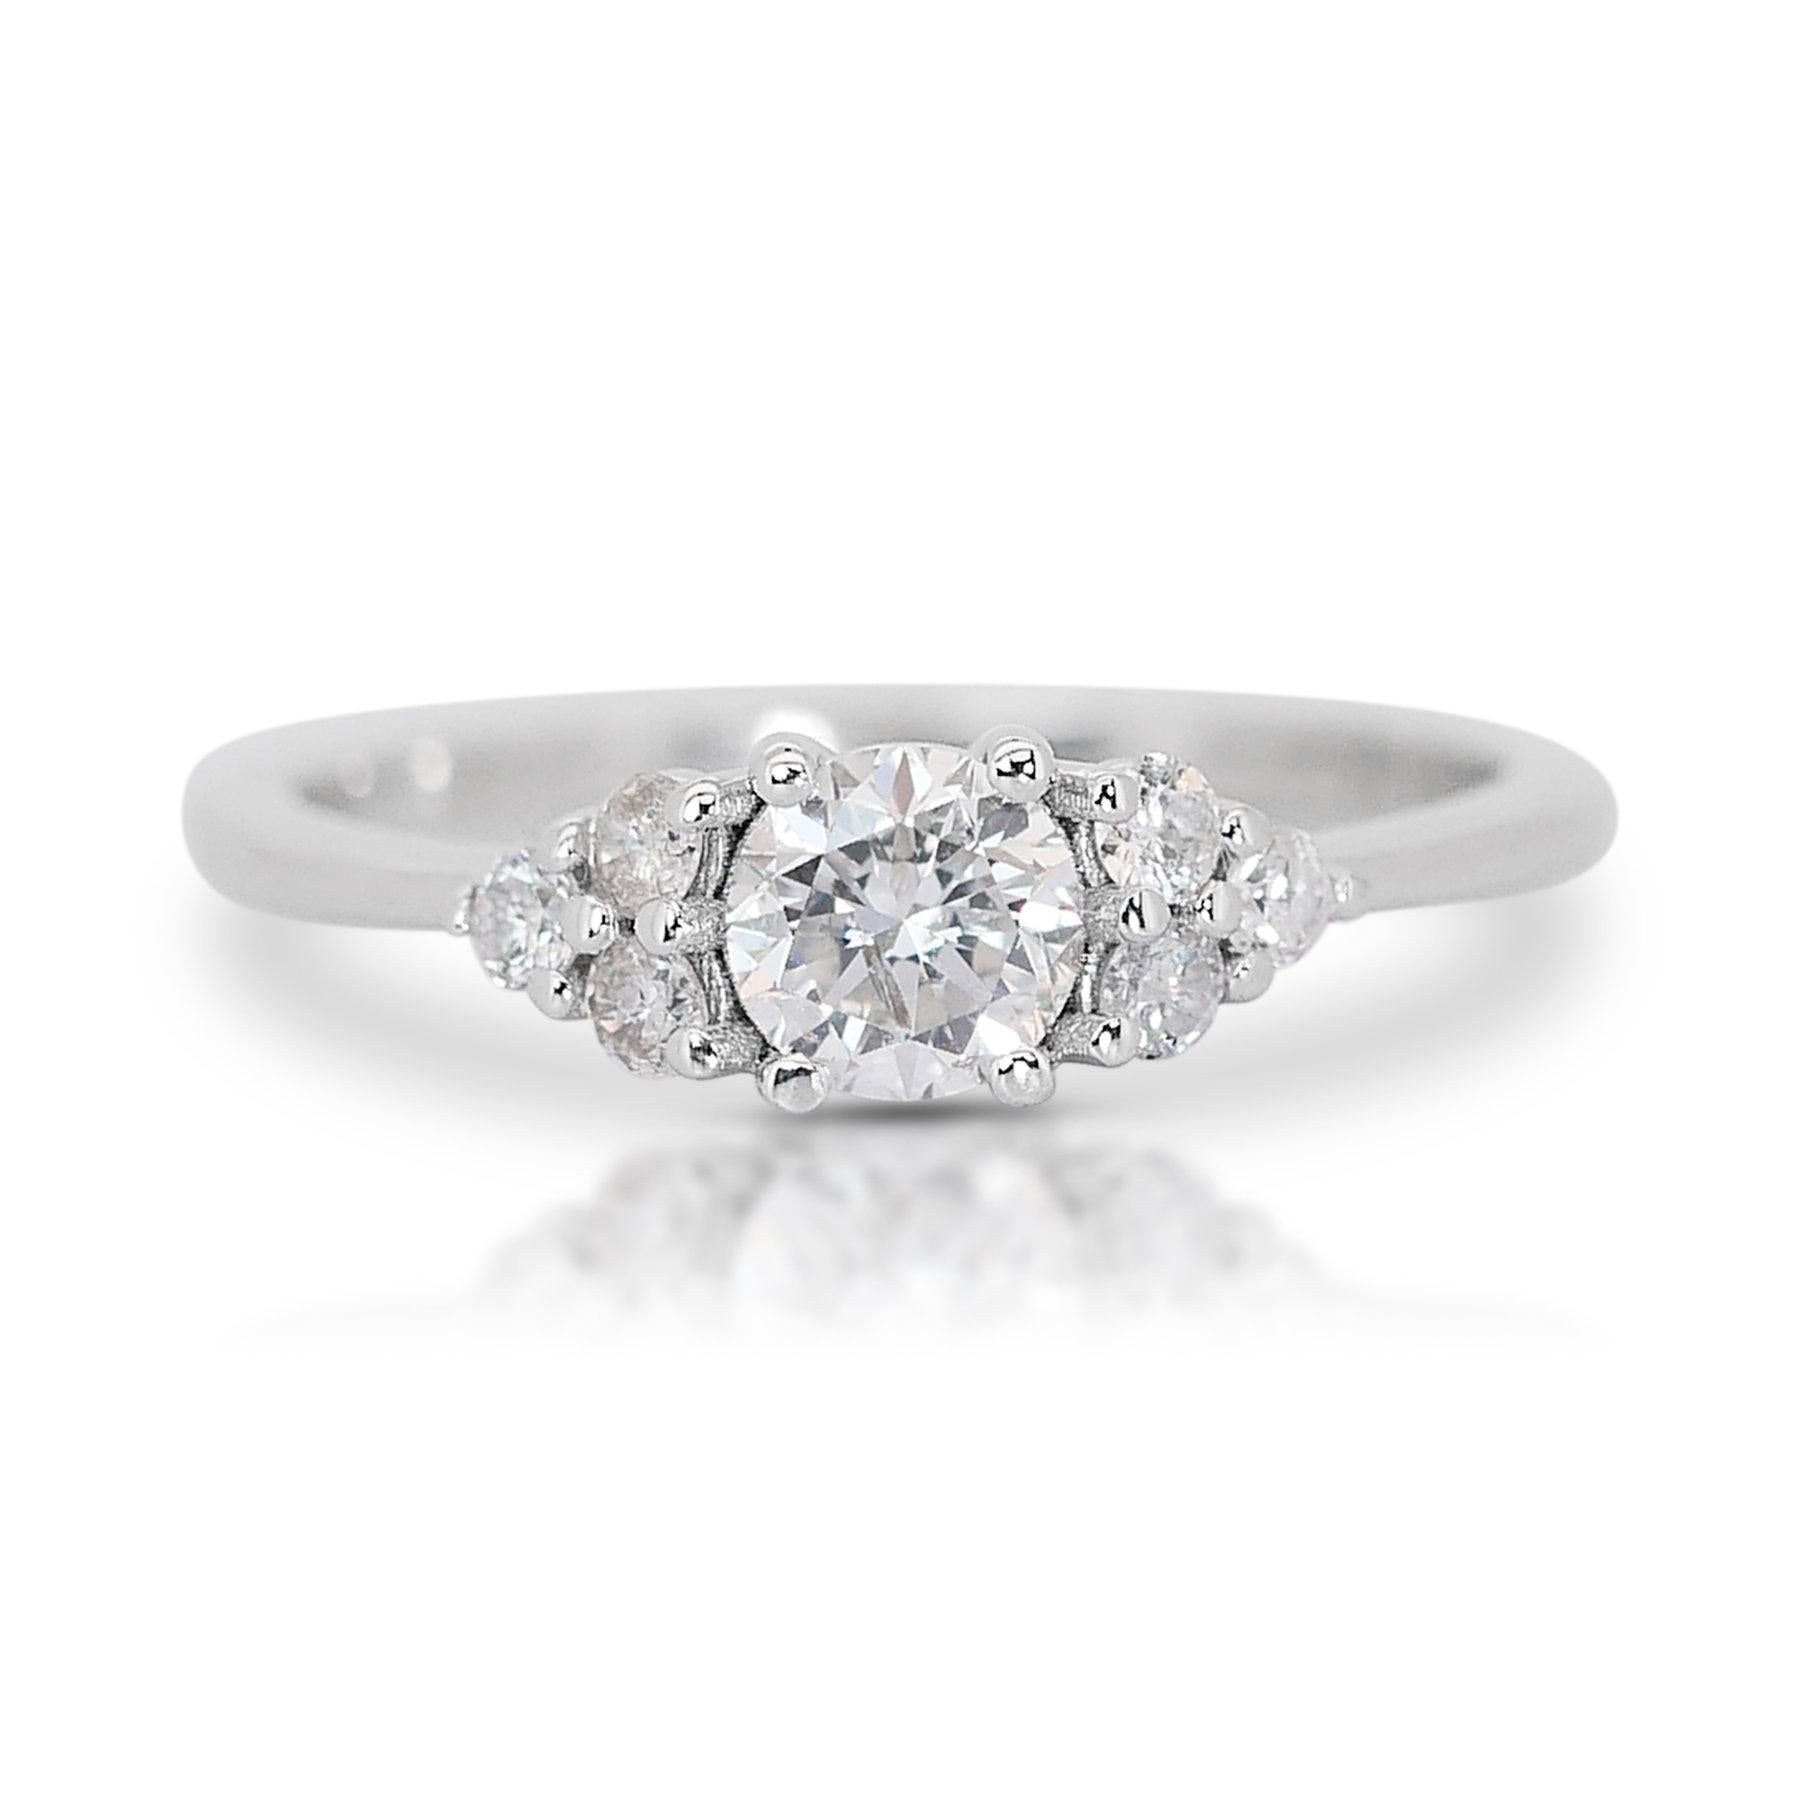 Sparkling 0.96ct Diamond Pave Ring in 18k White Gold - GIA Certified